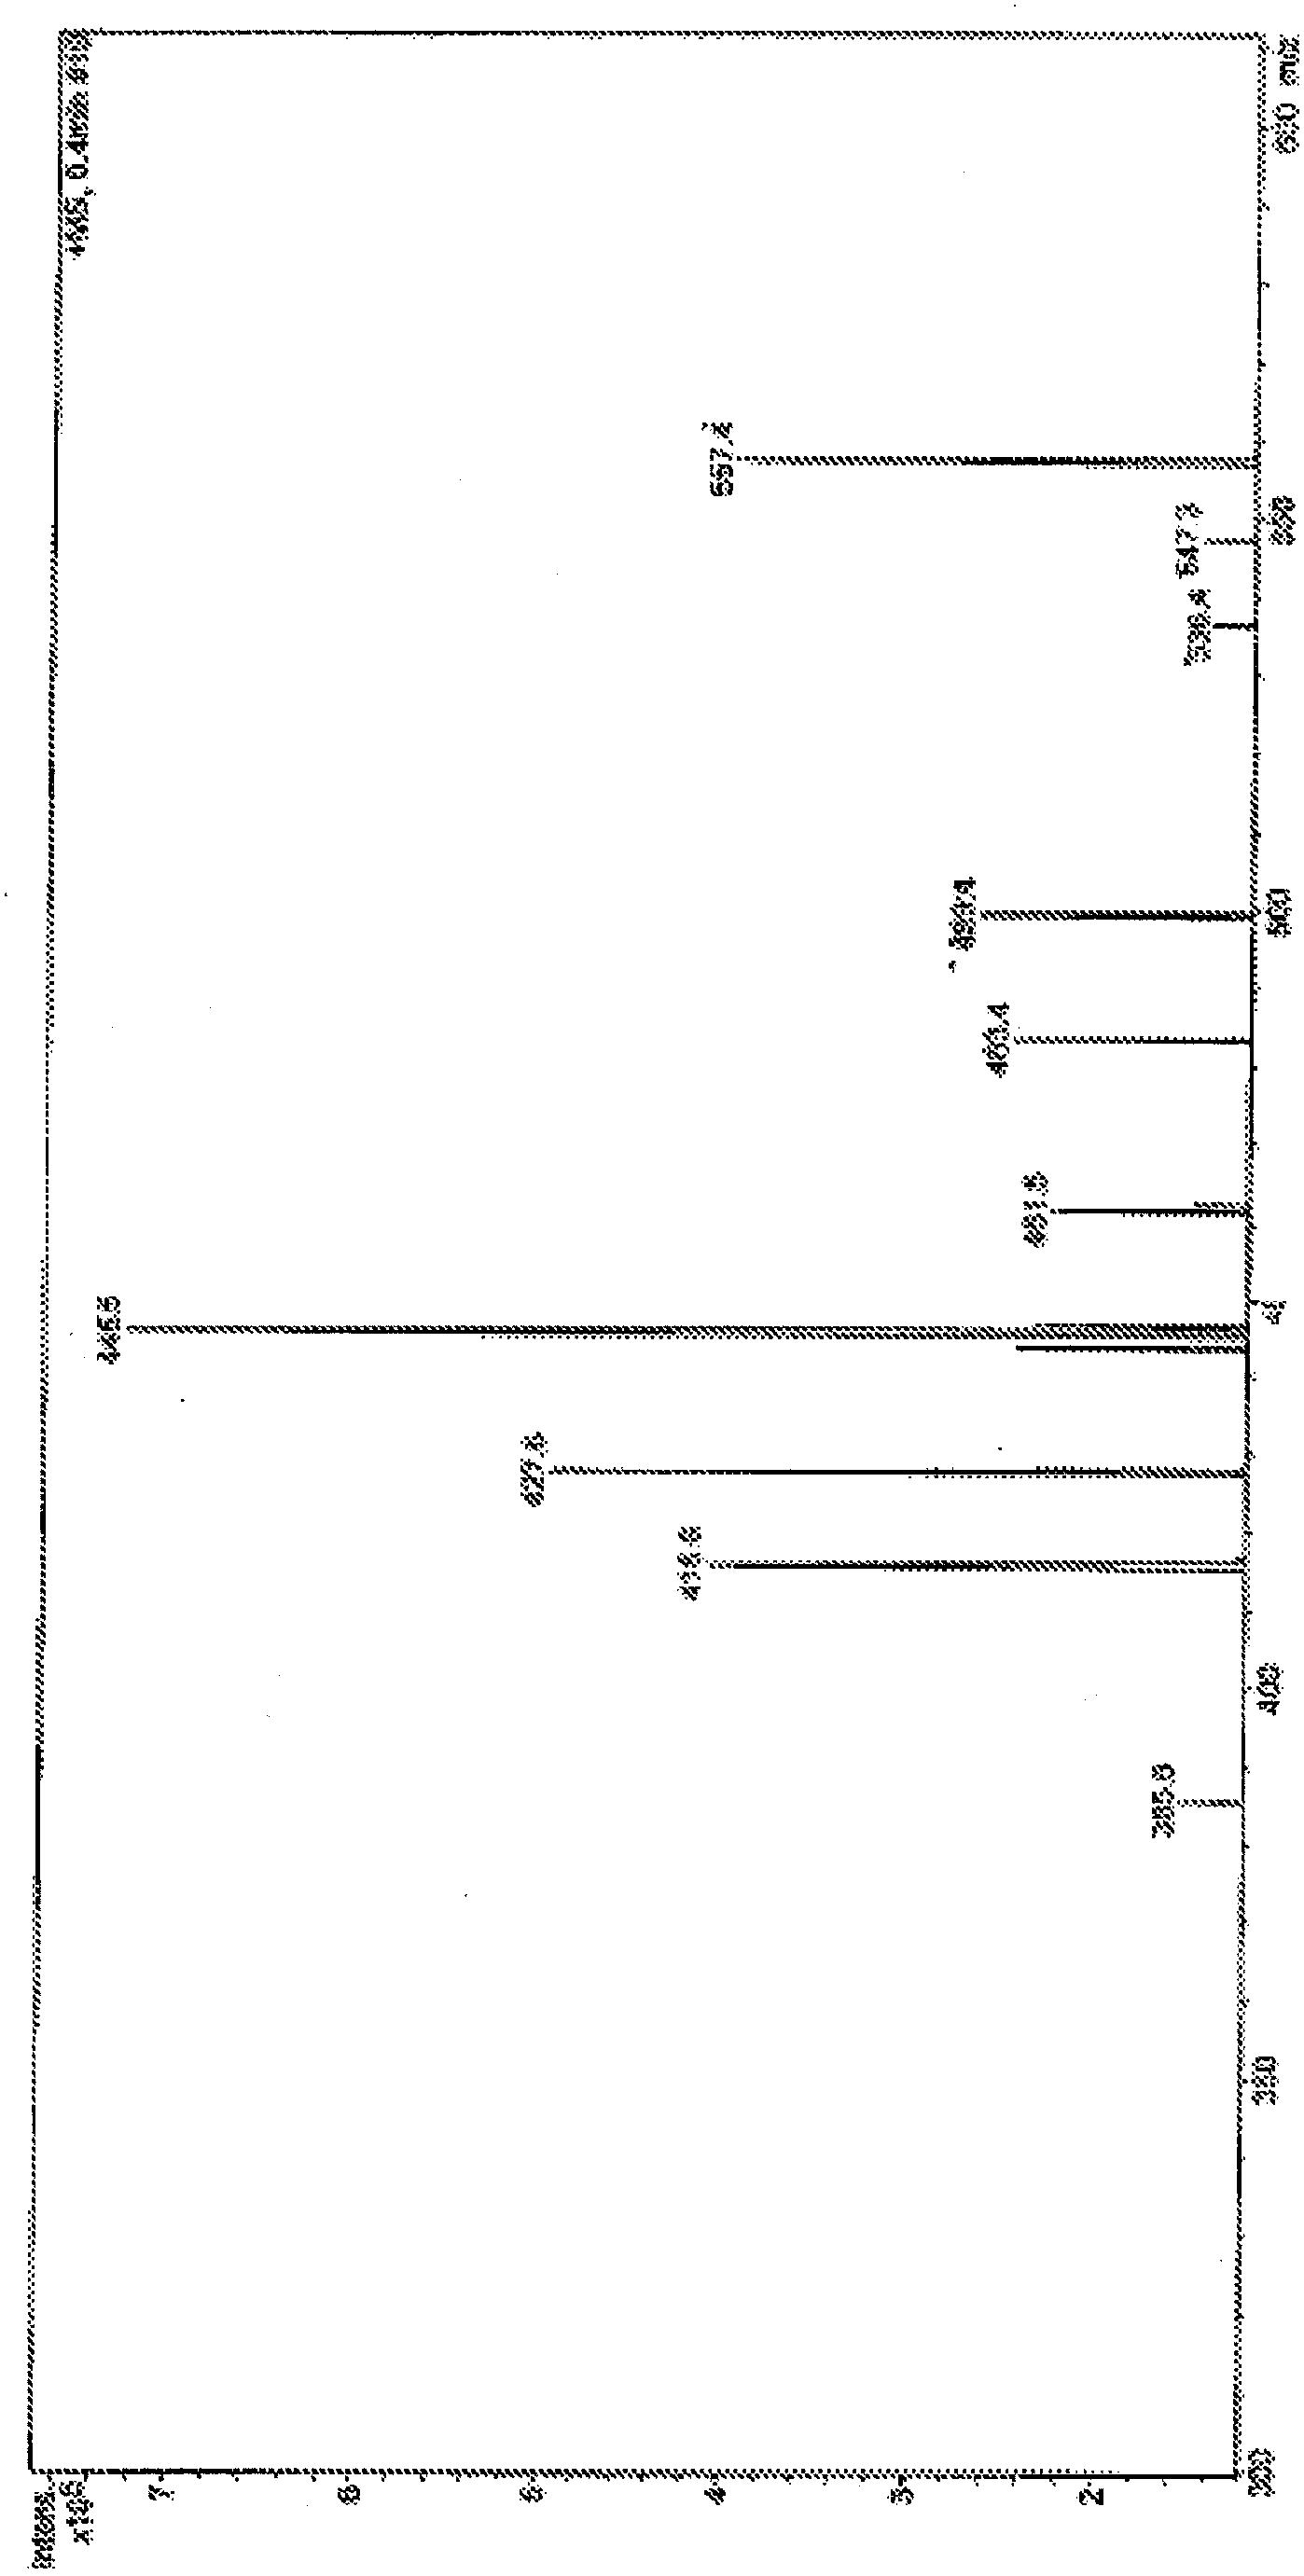 Methods For The Purification Of Deoxycholic Acid